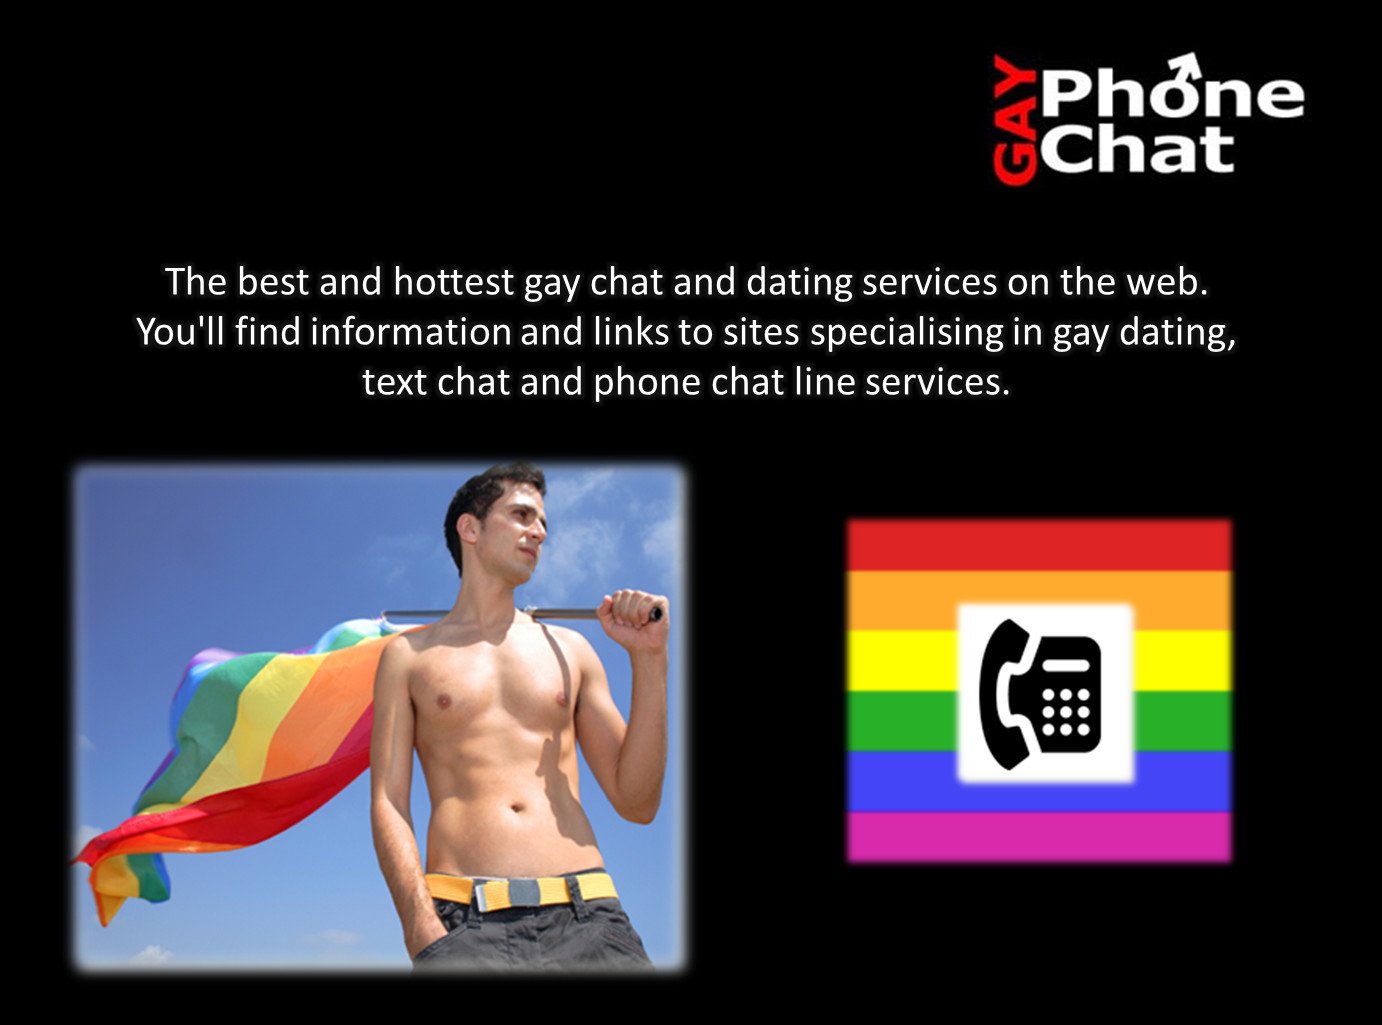 GayPhoneChat on Twitter: "Get chatting to #single #gay #guys in your a...